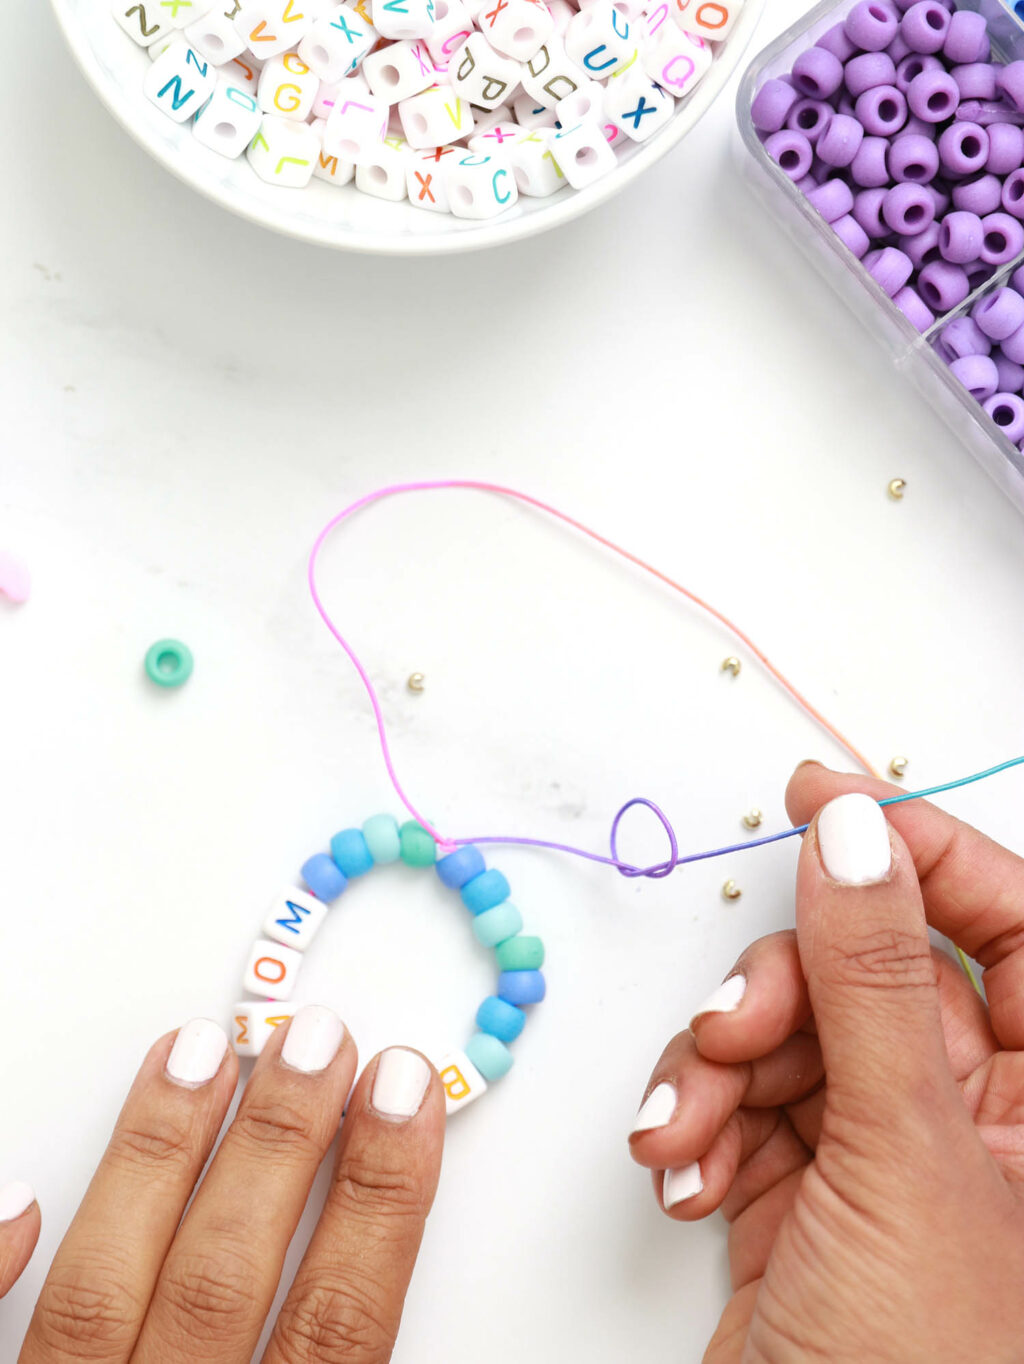 How To Make Bracelet With Beads In A Unique Way · How To Make A Beaded  Bracelet · Jewelry on Cut Out + Keep